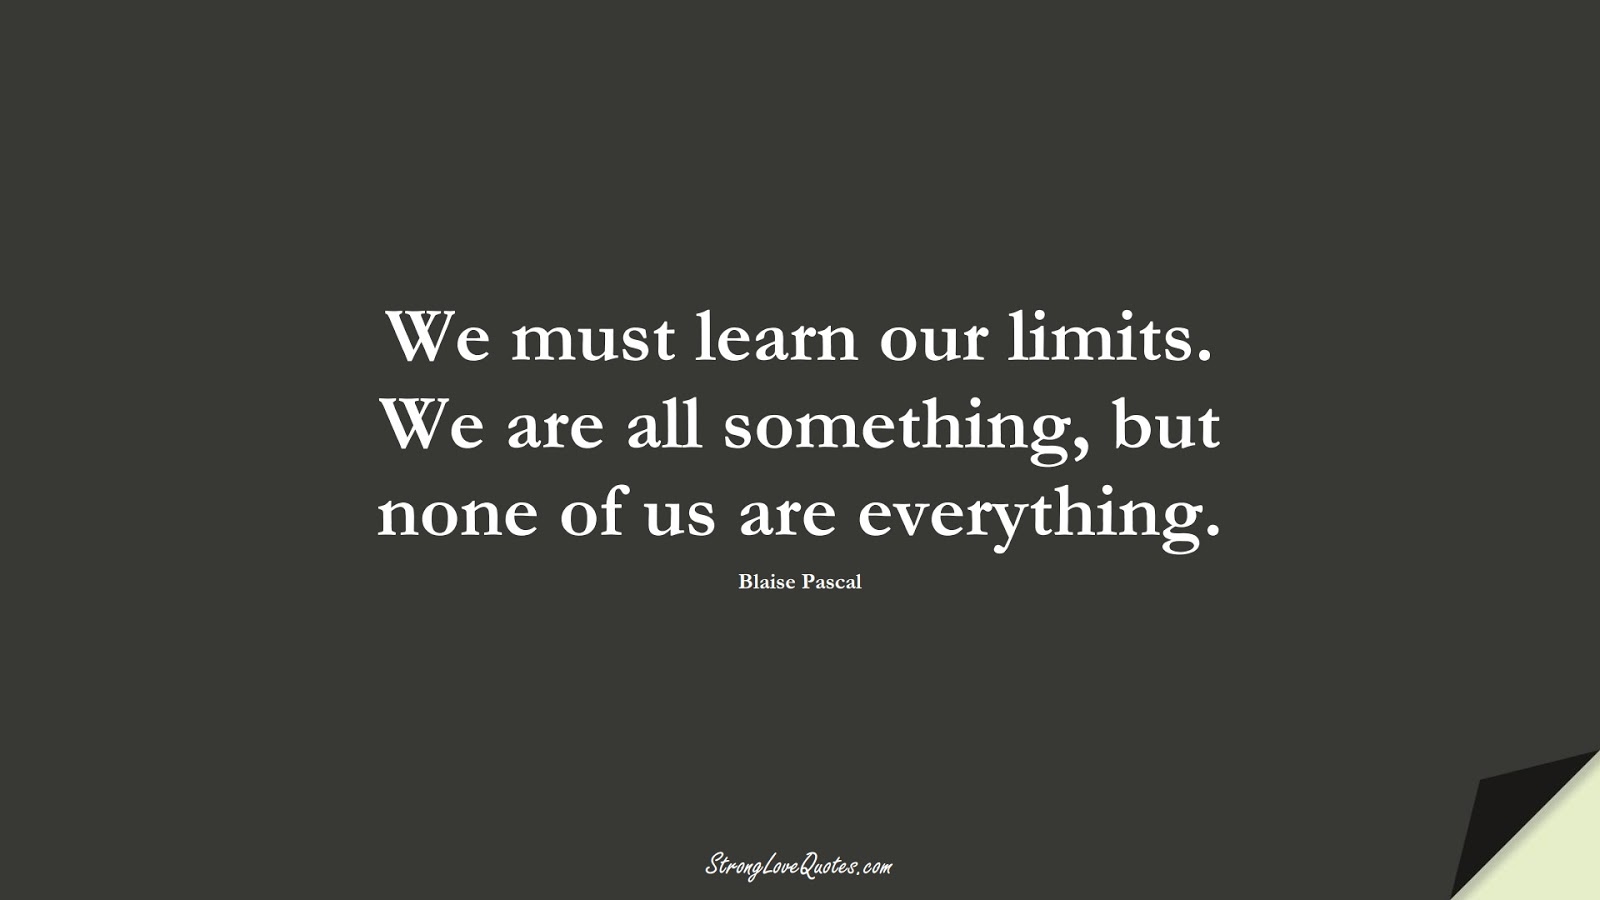 We must learn our limits. We are all something, but none of us are everything. (Blaise Pascal);  #KnowledgeQuotes